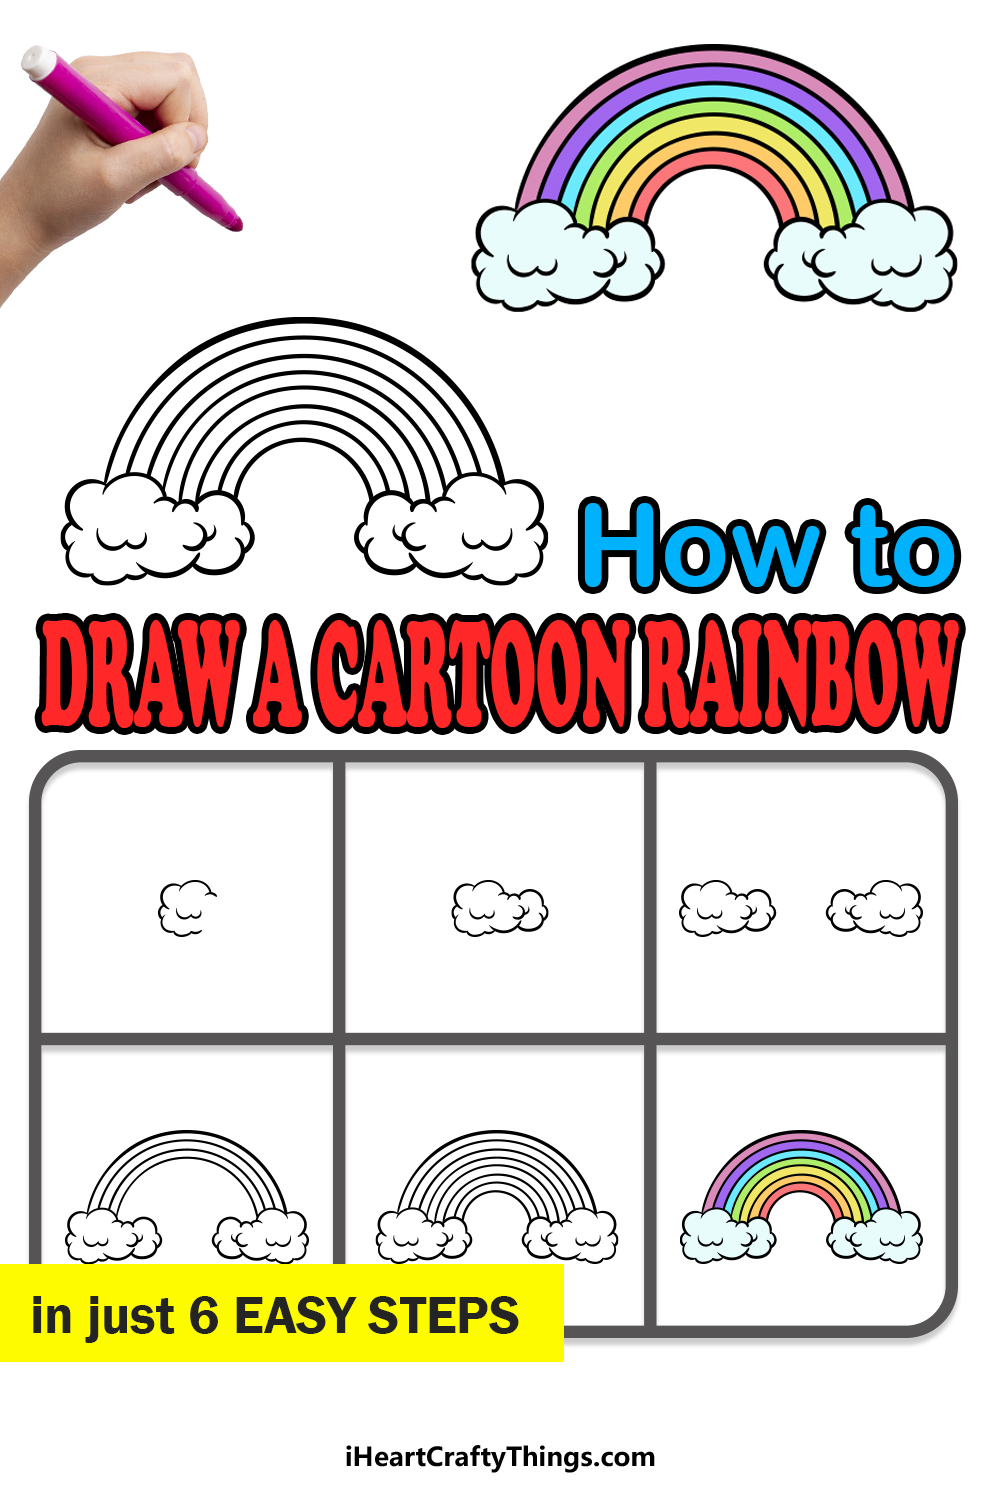 how to draw a cartoon rainbow in 6 easy steps